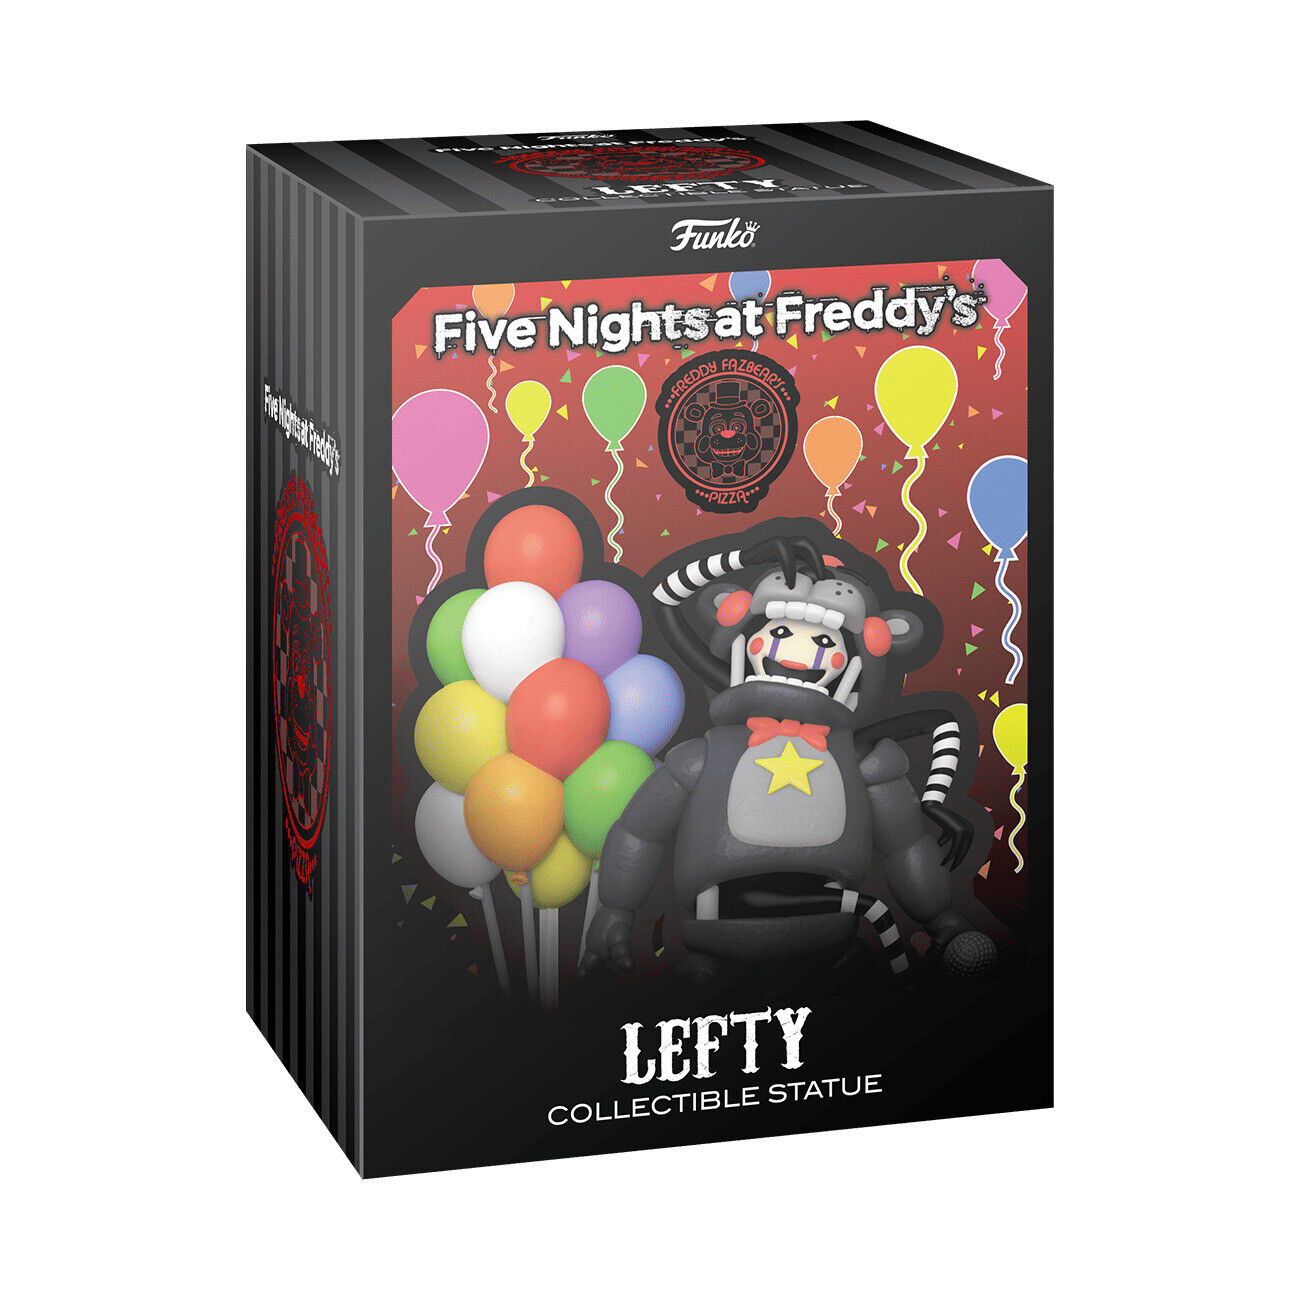 NewFunko Vinyl Statue: Five Nights at Freddy's Lefty Statue -  Ships Same Day